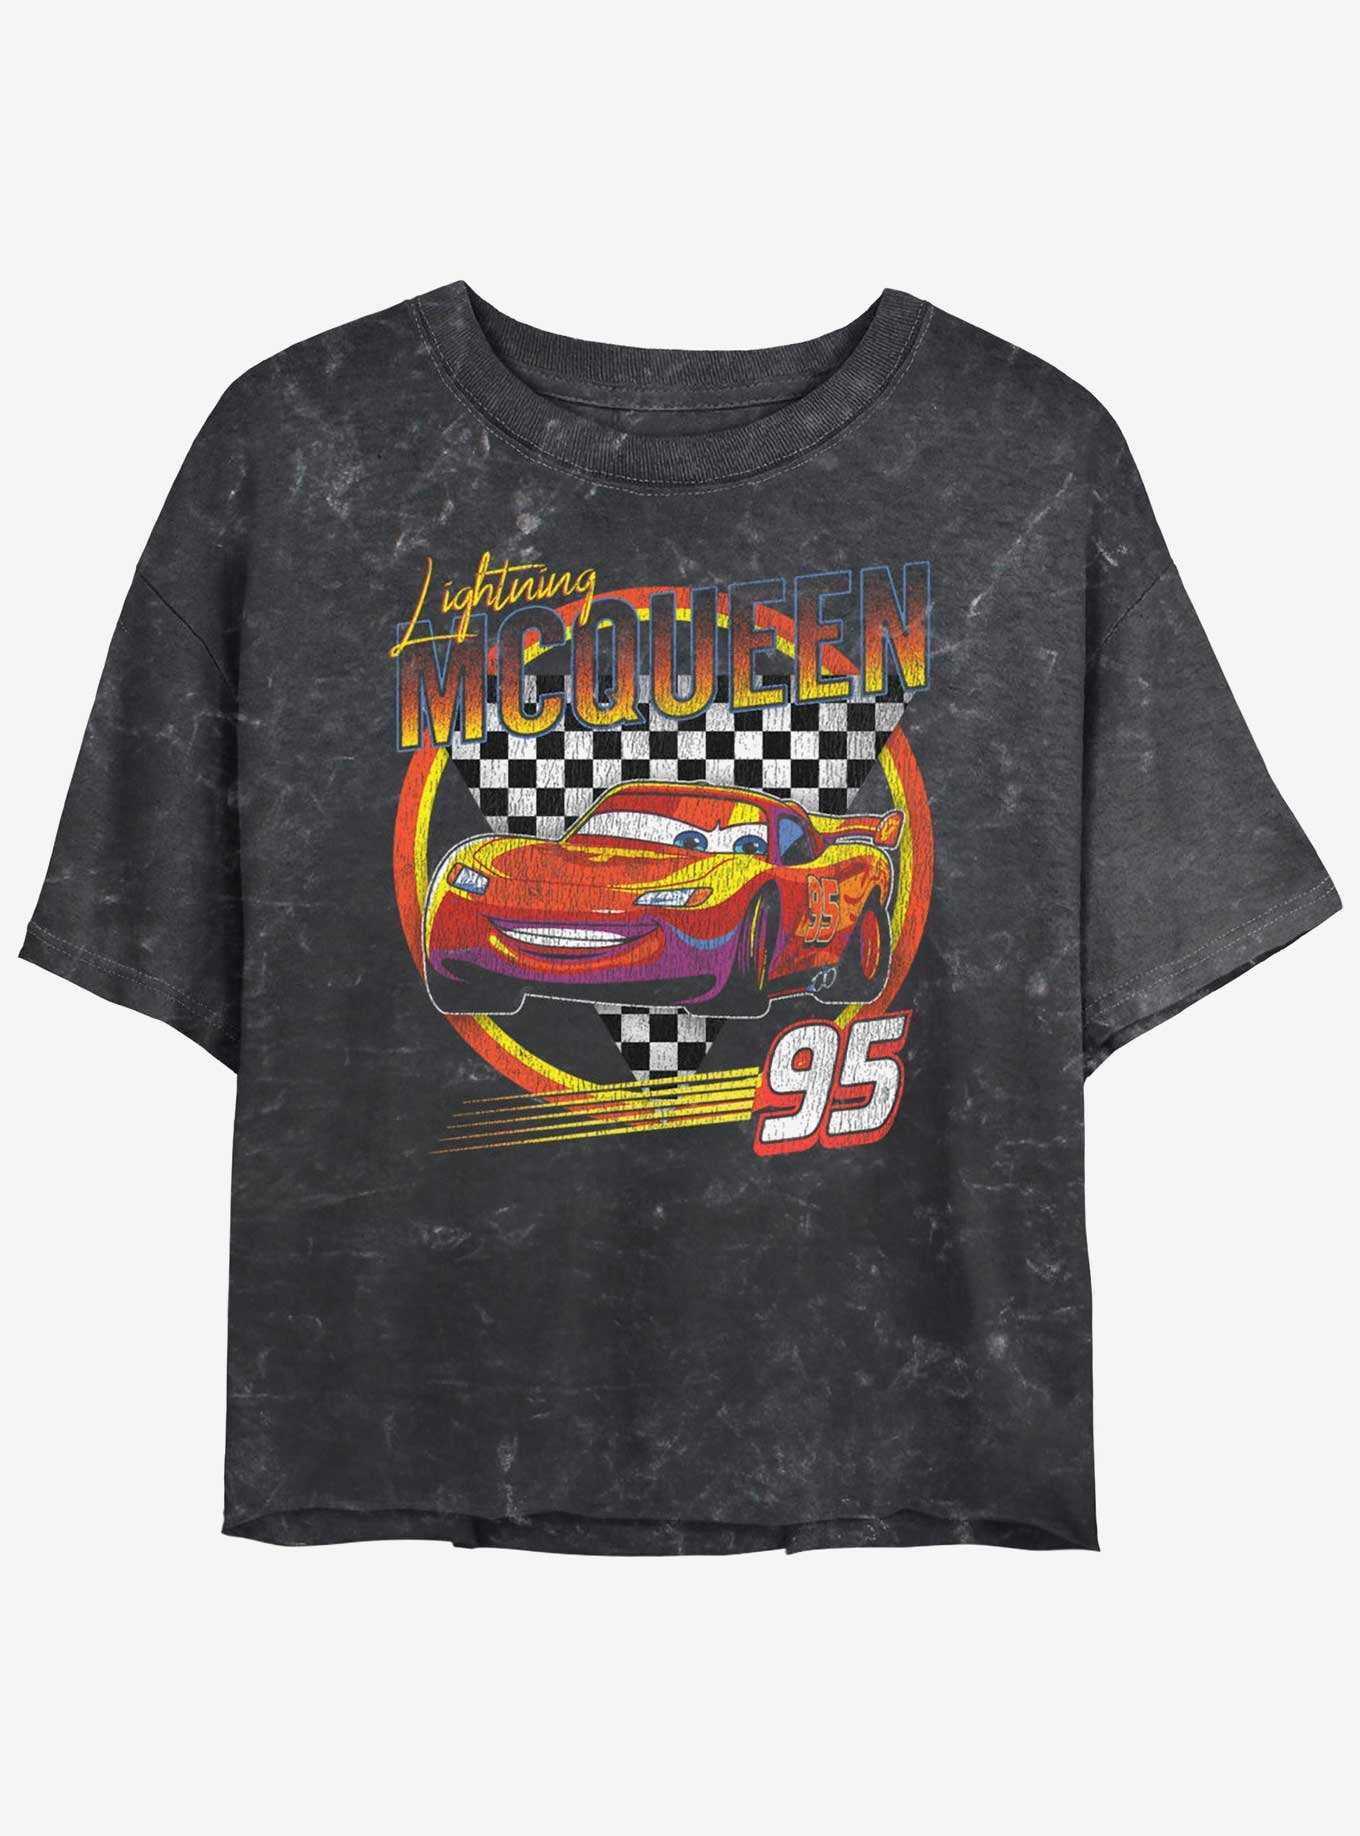 Disney/Pixar's Cars Boys 4-12 Lightning McQueen Valentine's Day Graphic Tee  by Jumping Beans®